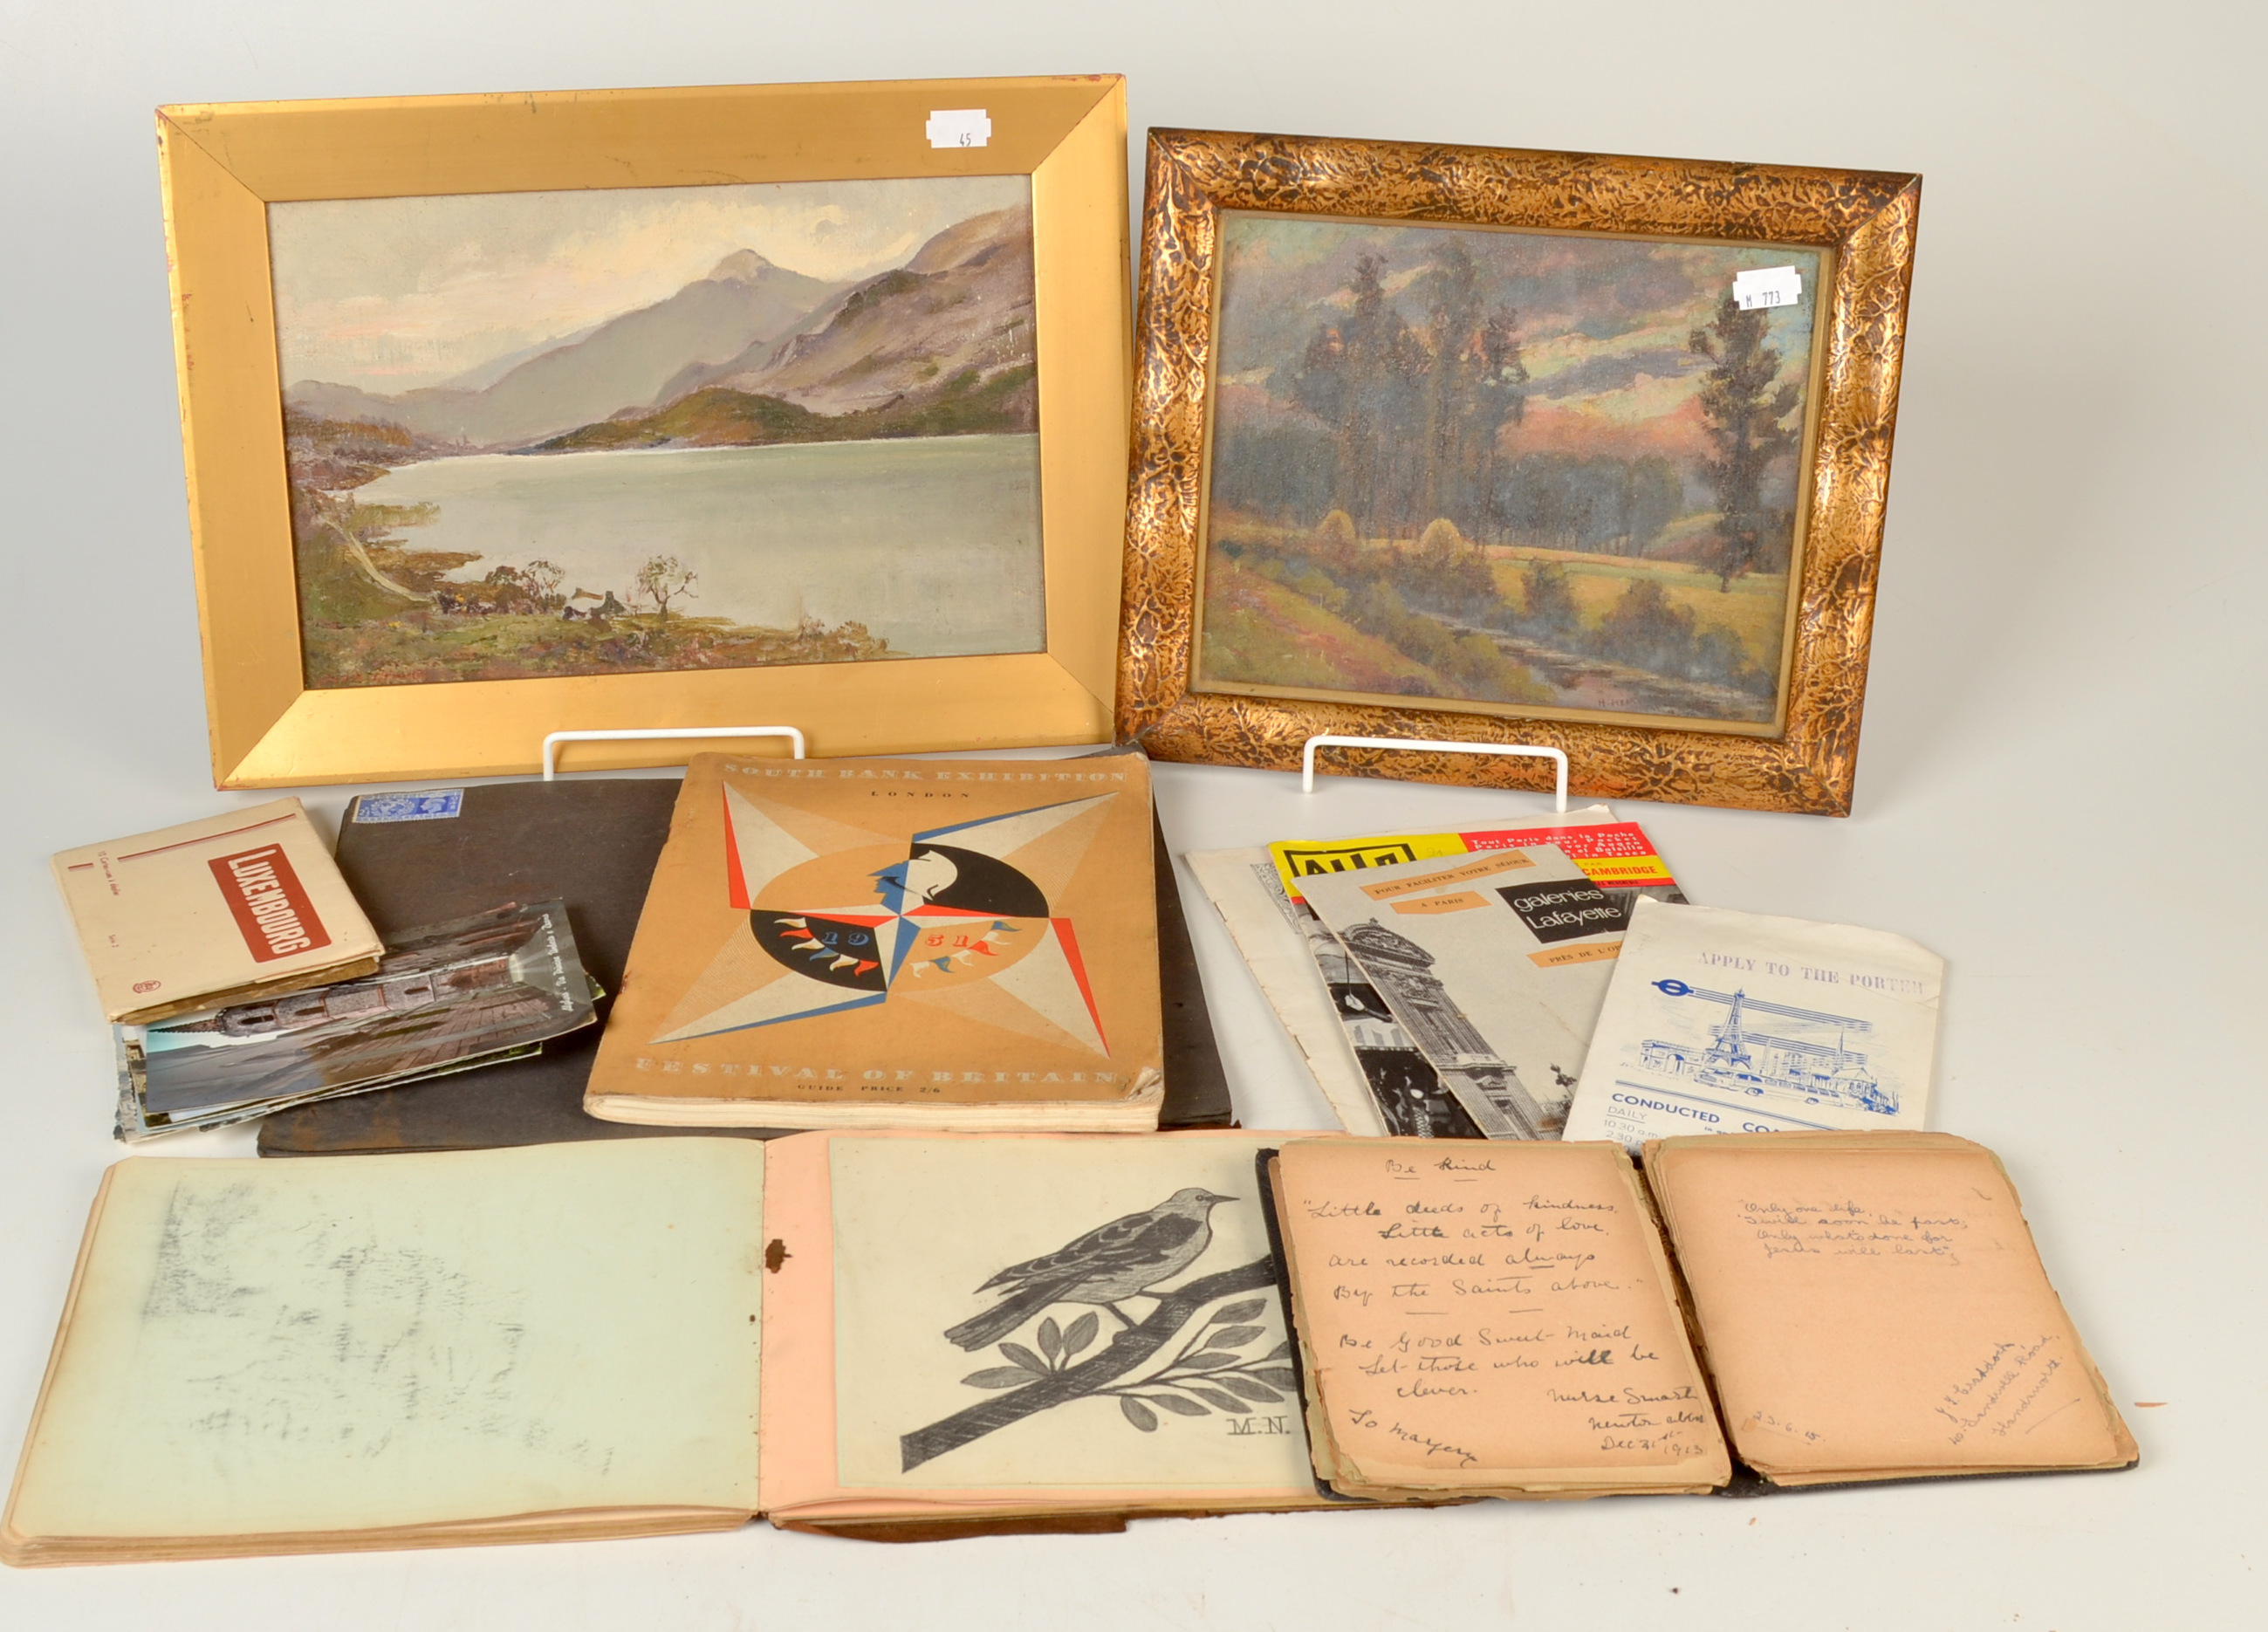 Two autograph books, one WWI, the other WWI to 1950s, a Festival of Britain 1951 guide book etc.